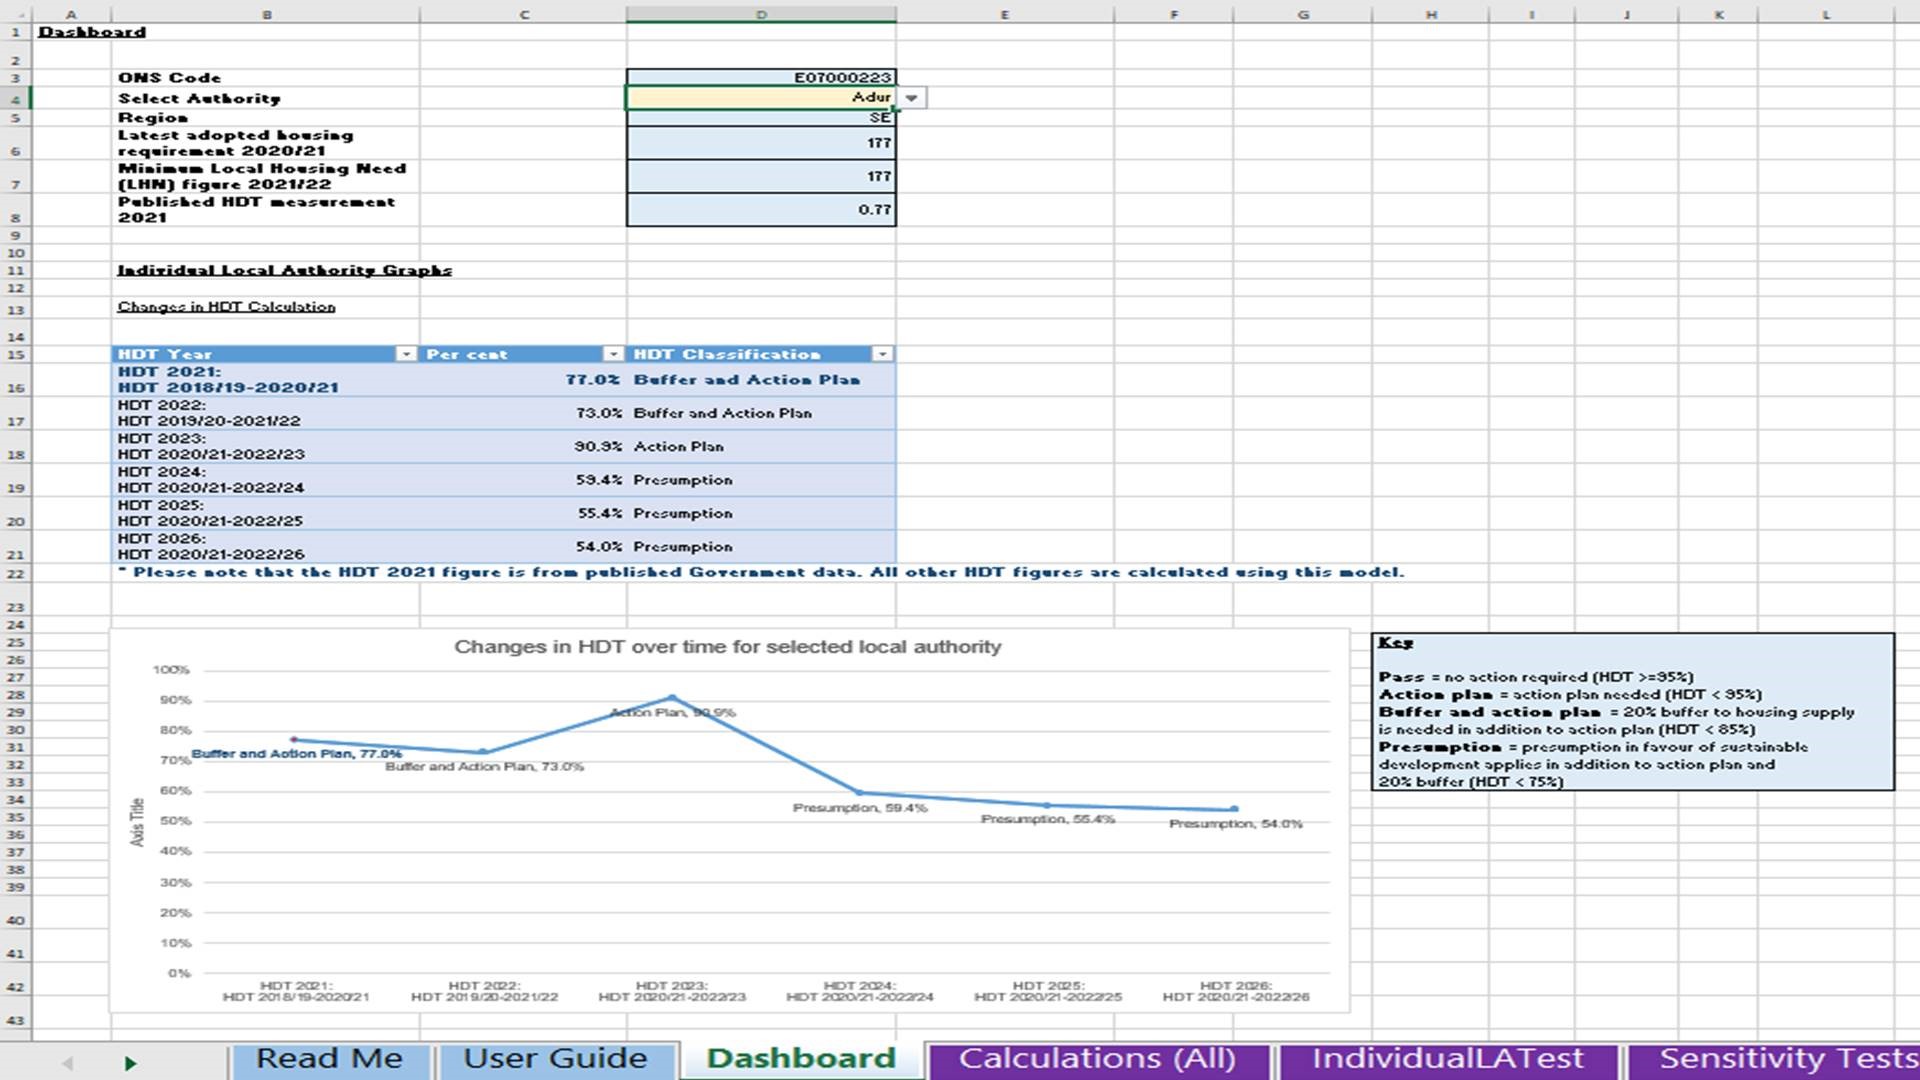 ure 2: Example of graph in the Dashboard sheet (projected changes in HDT over time)